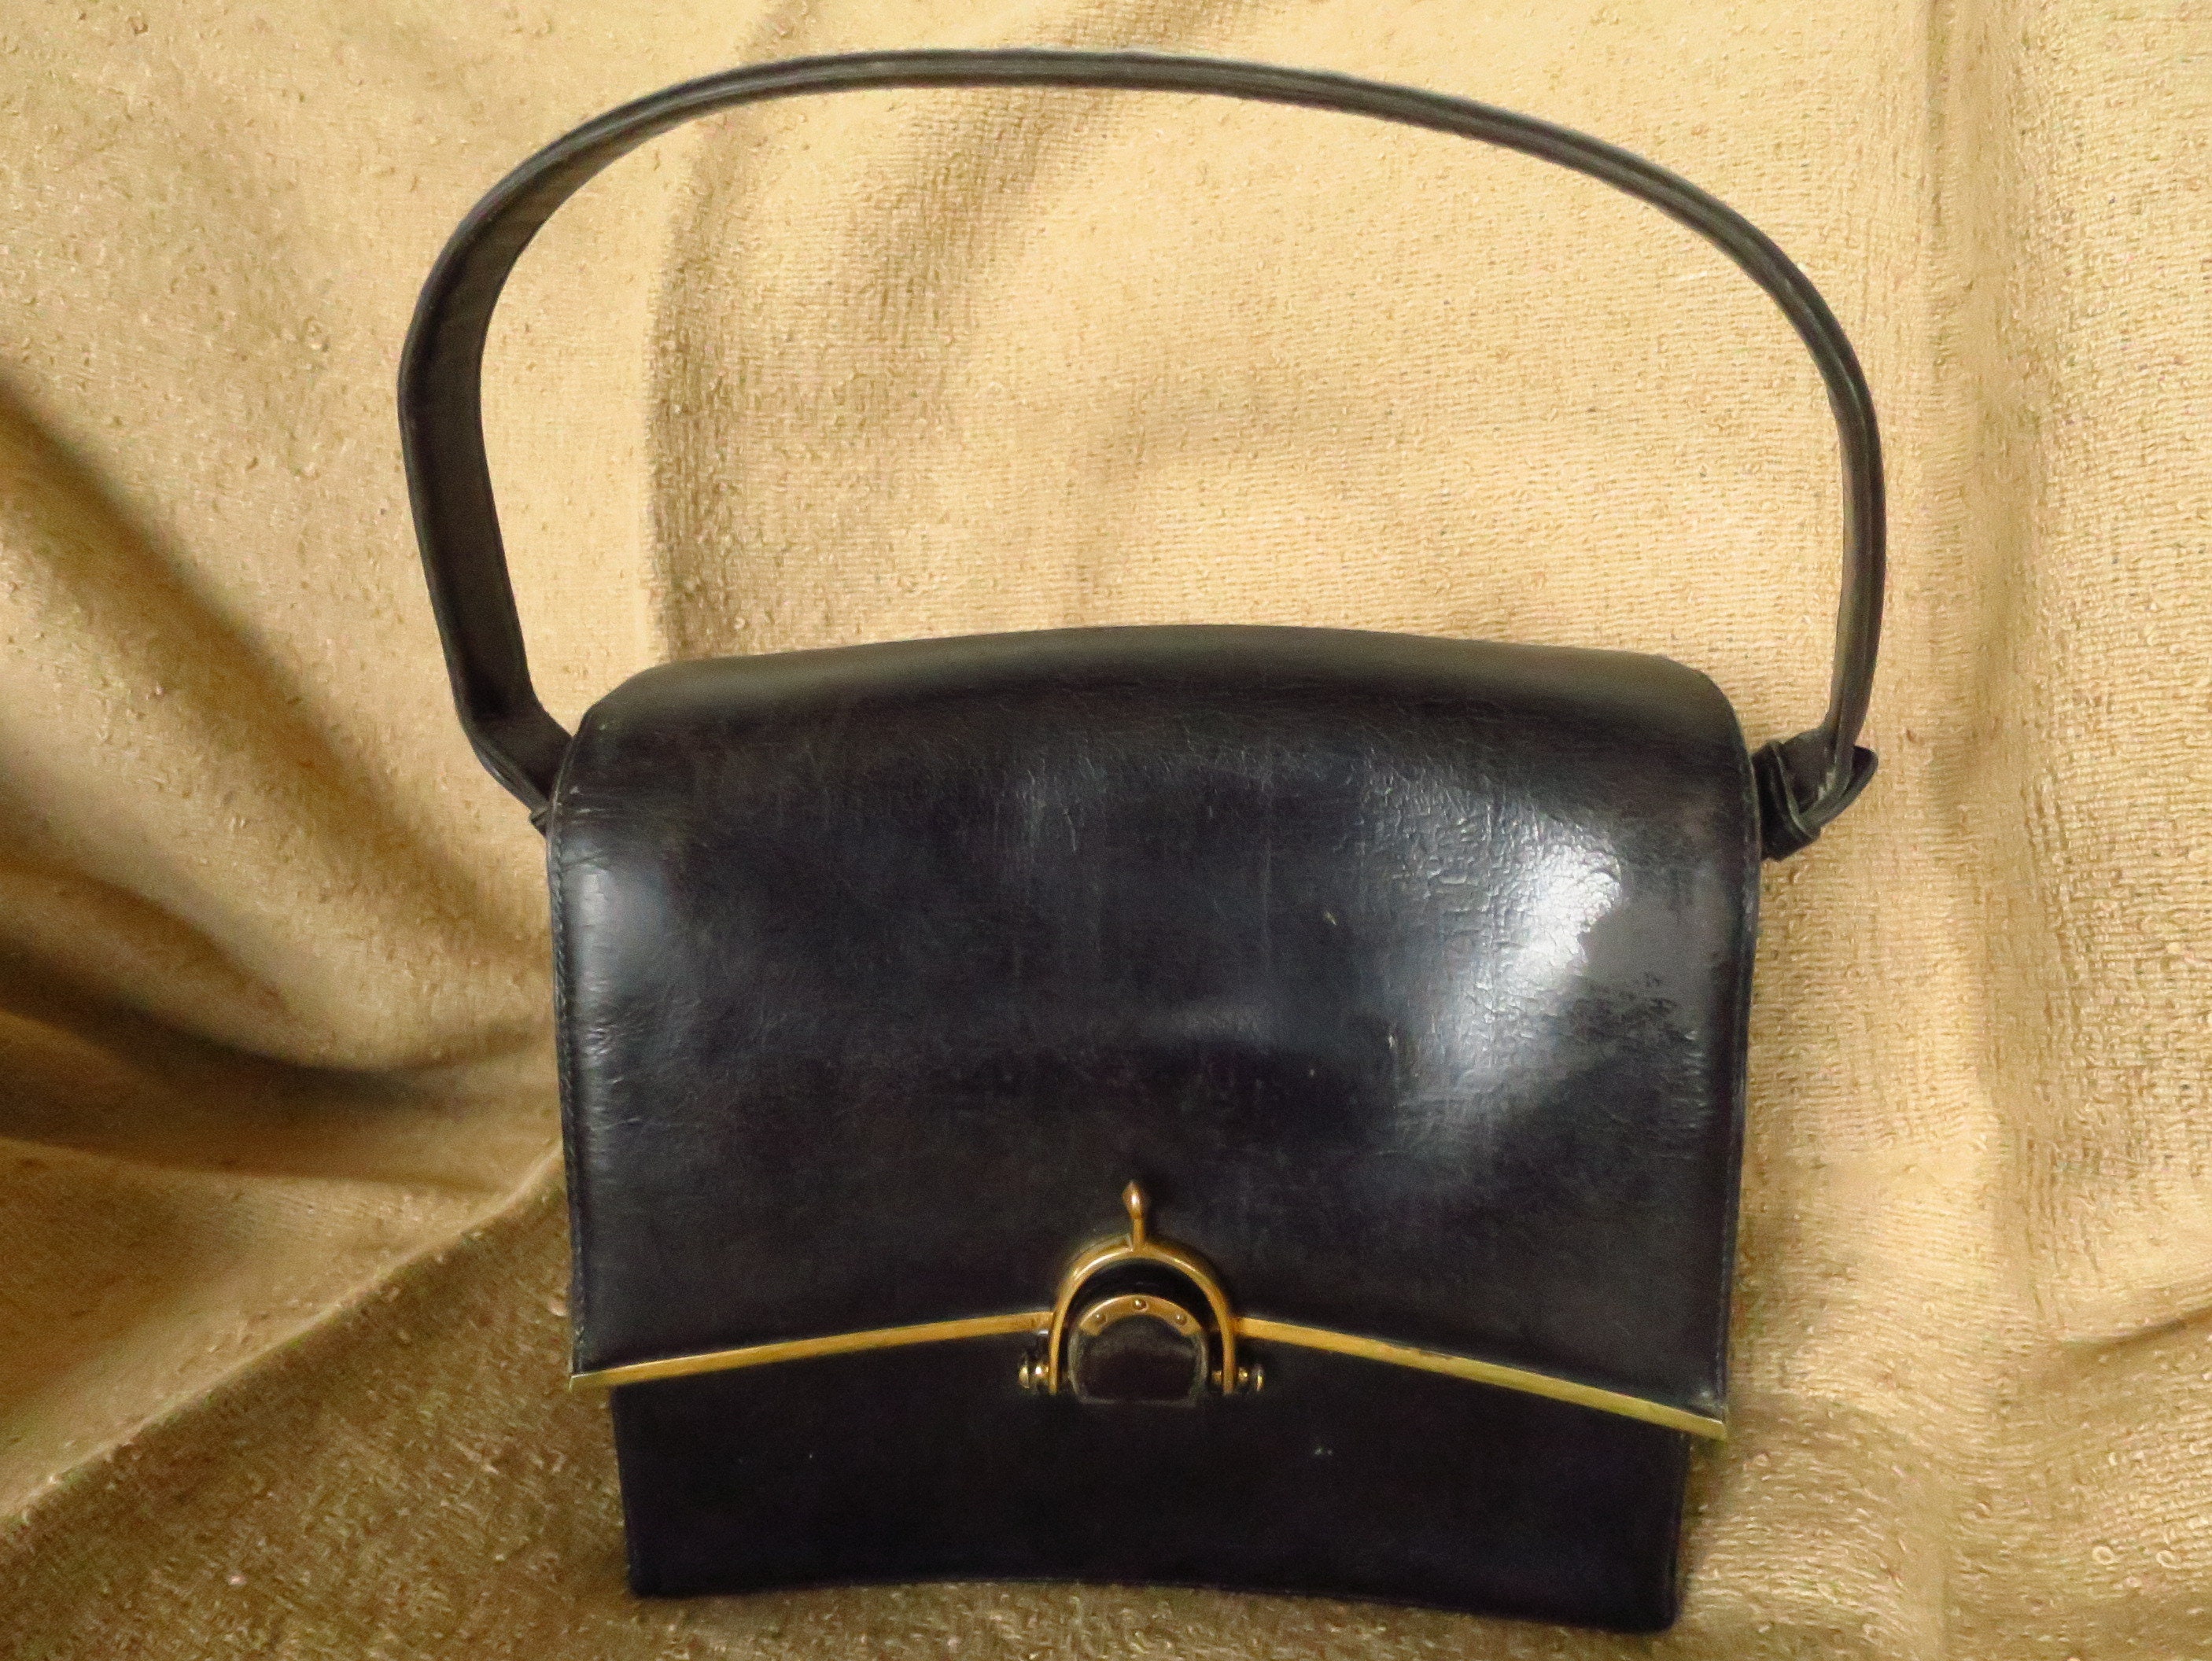 Hermès - Authenticated Kelly to Go Handbag - Leather Black for Women, Never Worn